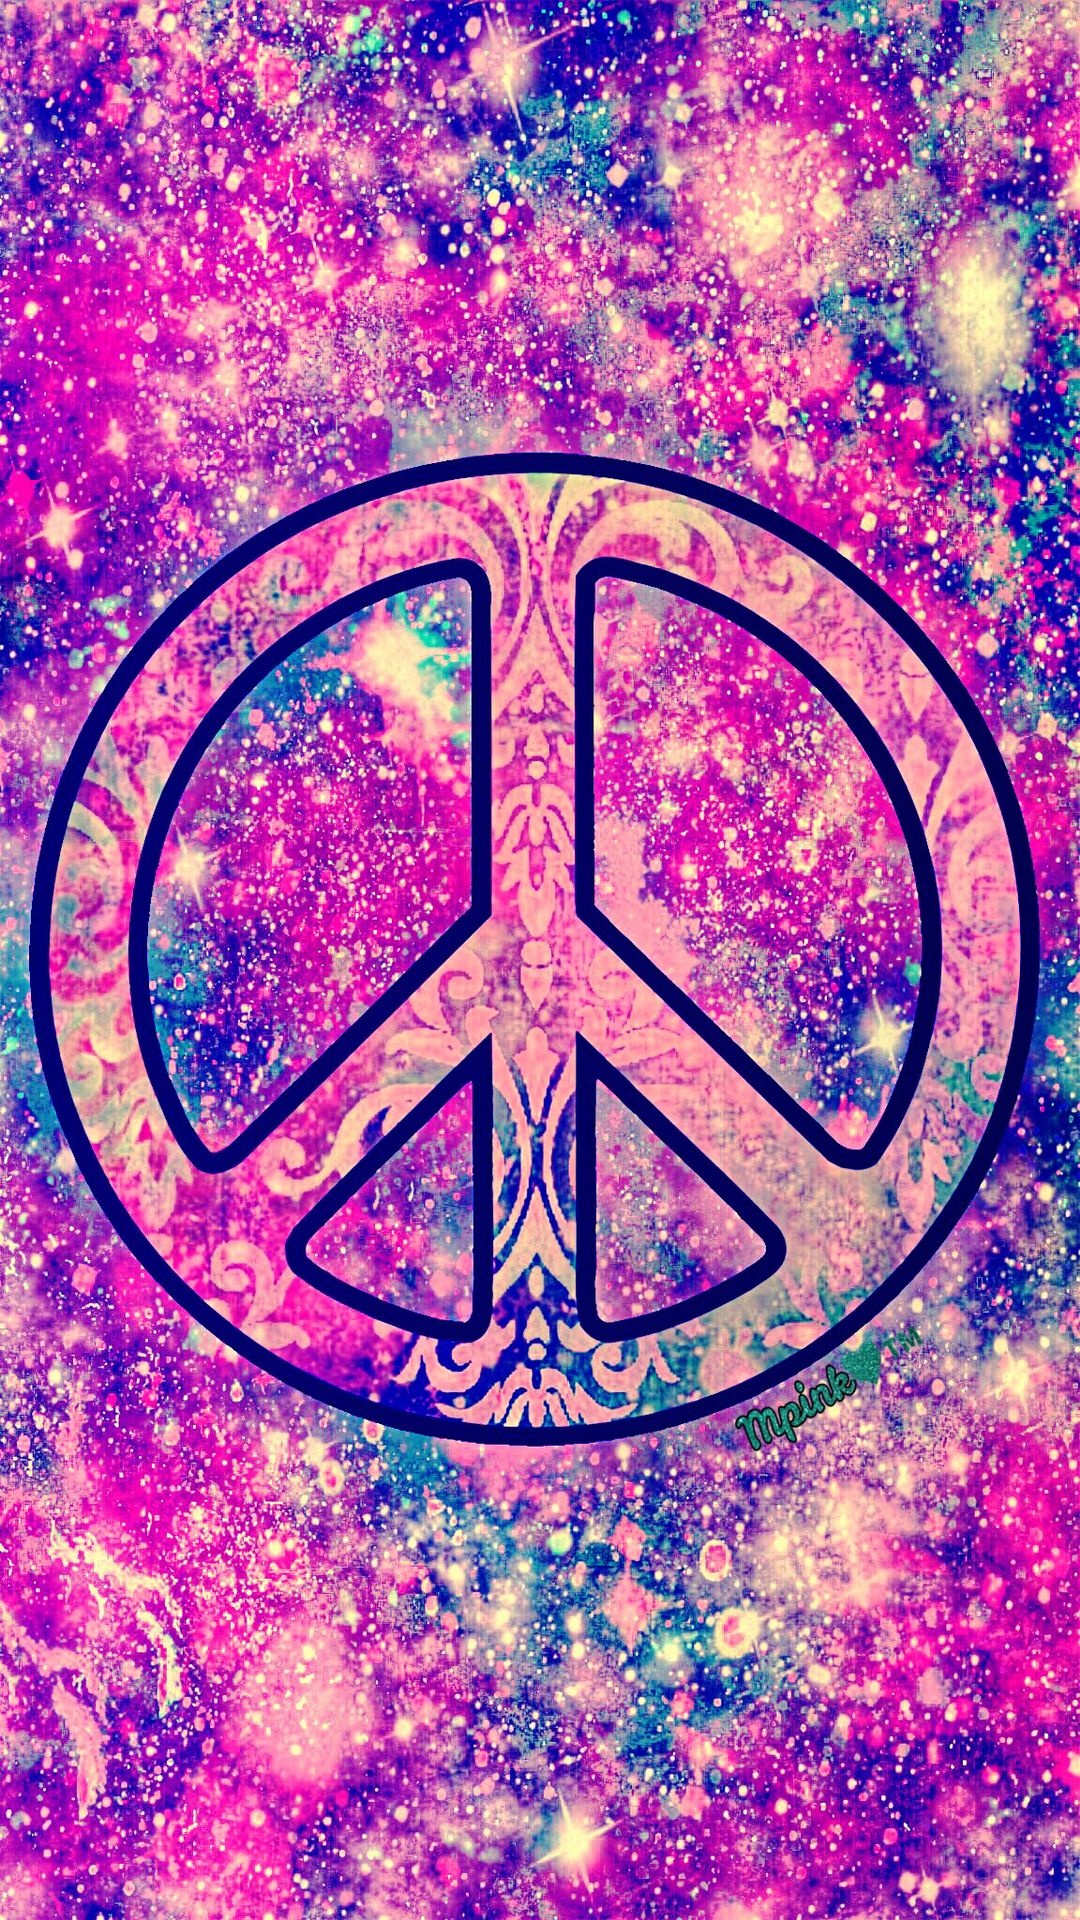 Vintage Peace Sign, Galaxy Wallpaper, Sparkle Glitter, 1080x1920 Full HD Phone